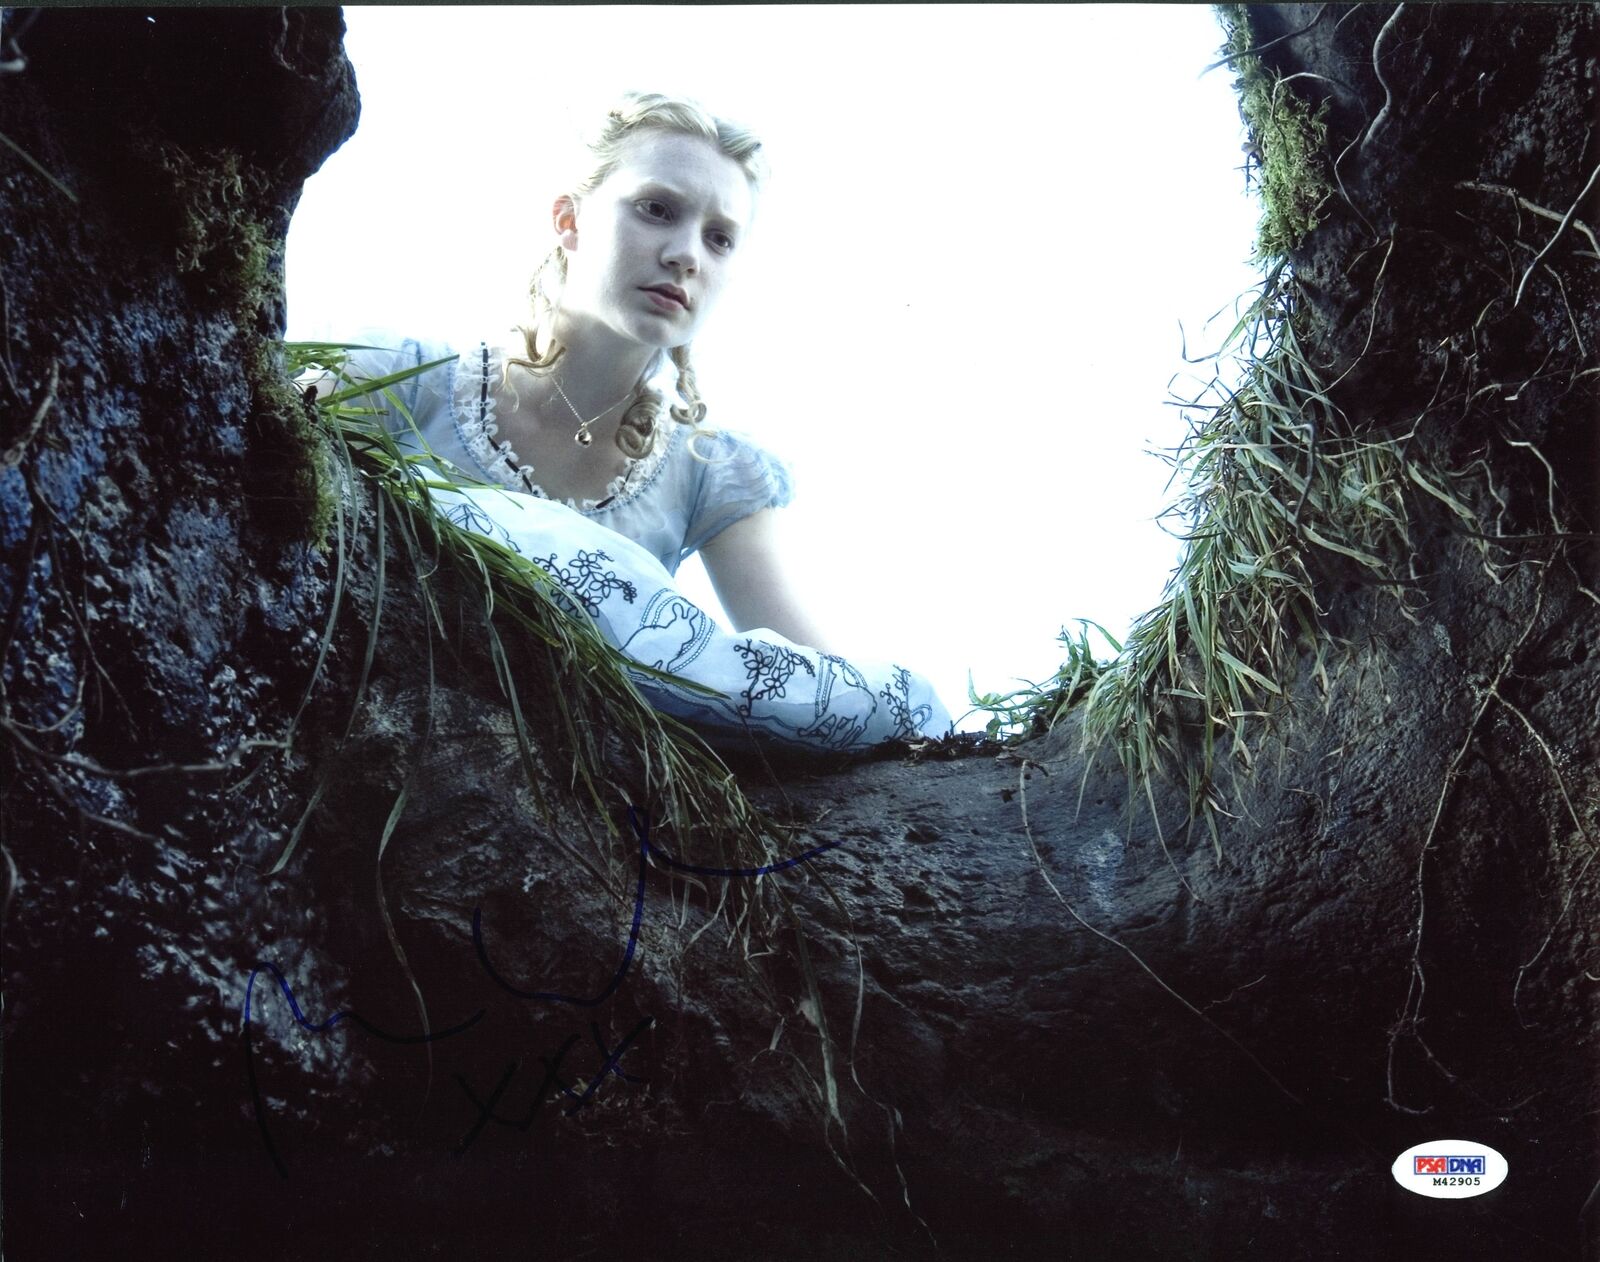 Mia Wasikowska Alice in Wonderland Authentic Signed 11X14 Photo Poster painting PSA/DNA #M42905